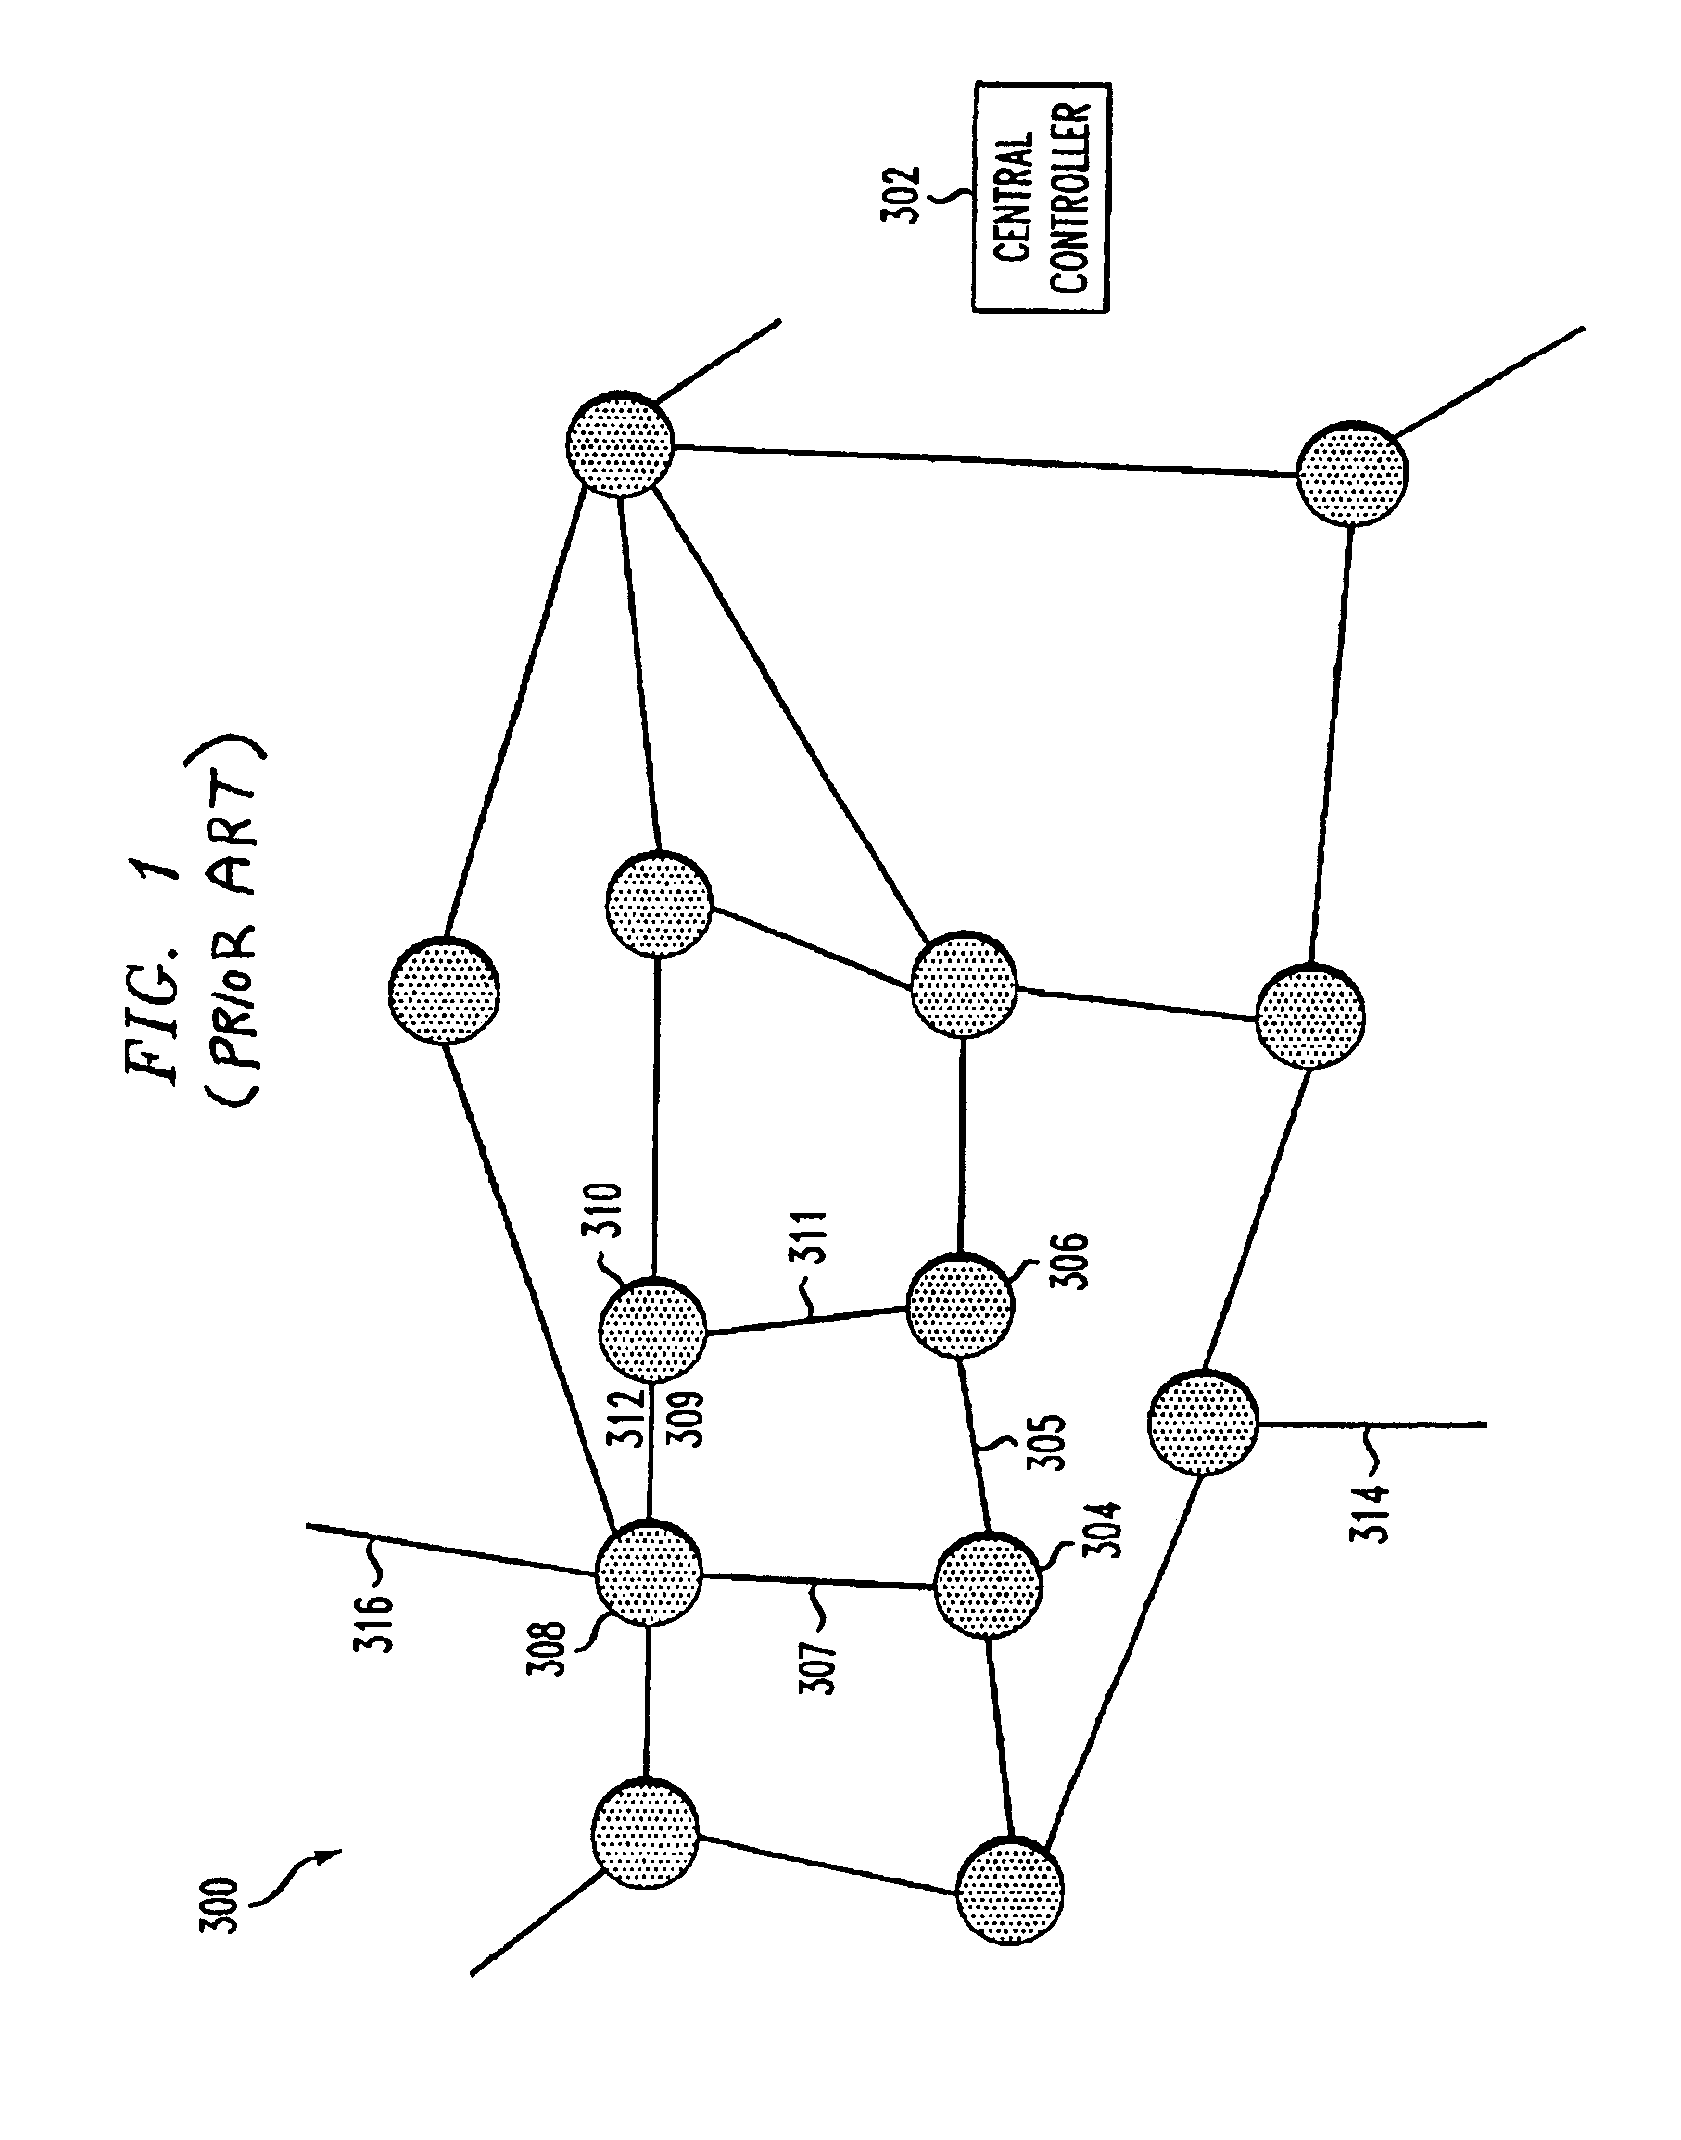 Hierarchical telecommunications network with fault recovery